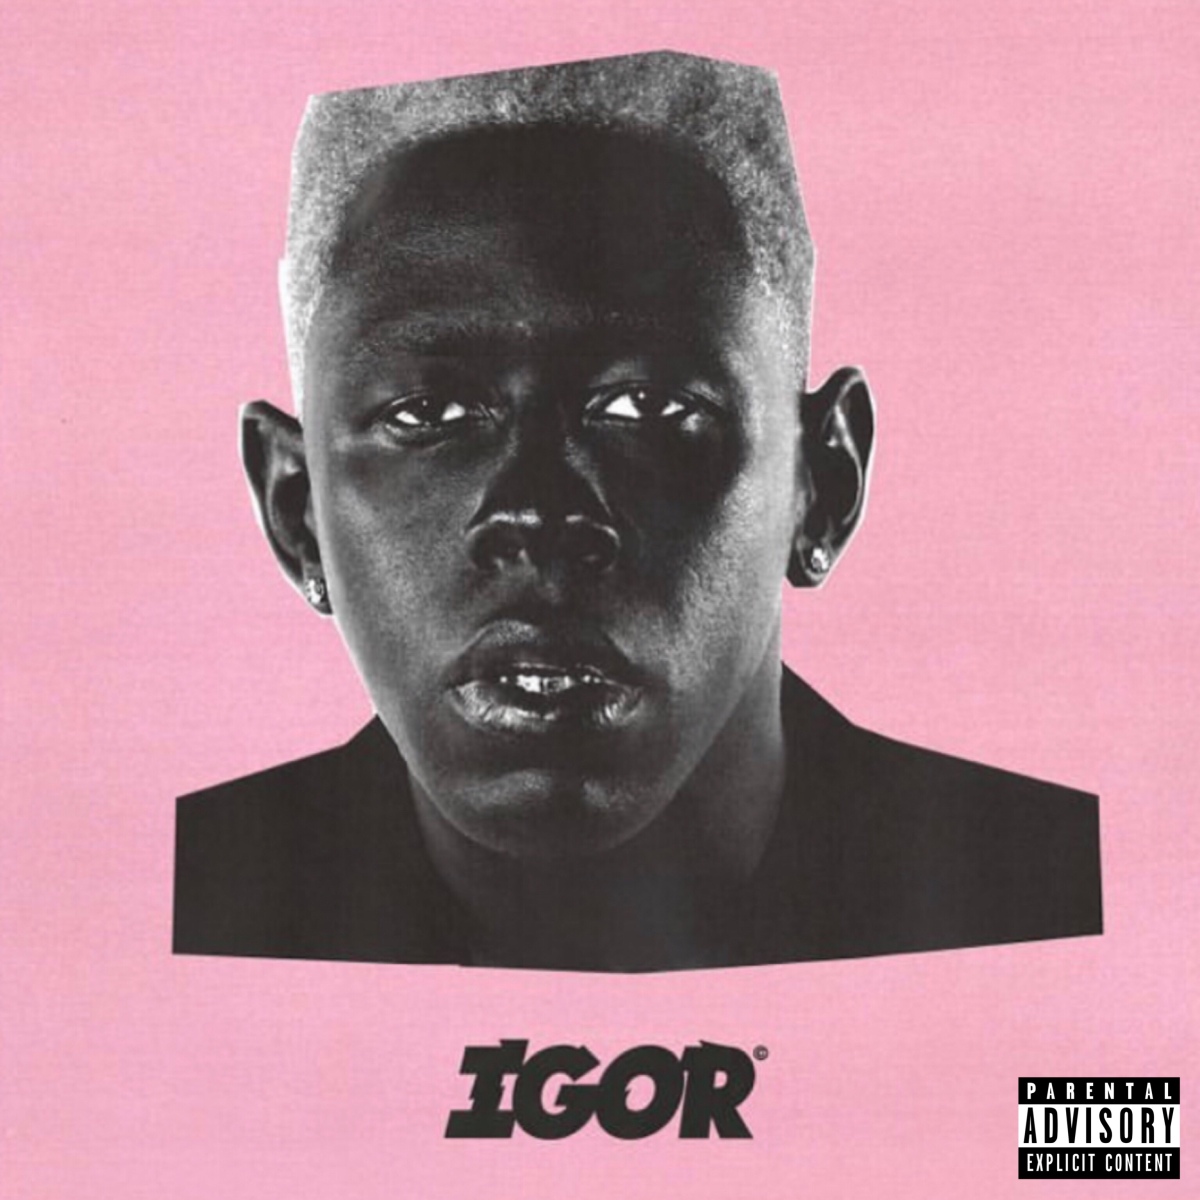 Tyler, The Creator – “IGOR” review – Legends Will Never Die1200 x 1200